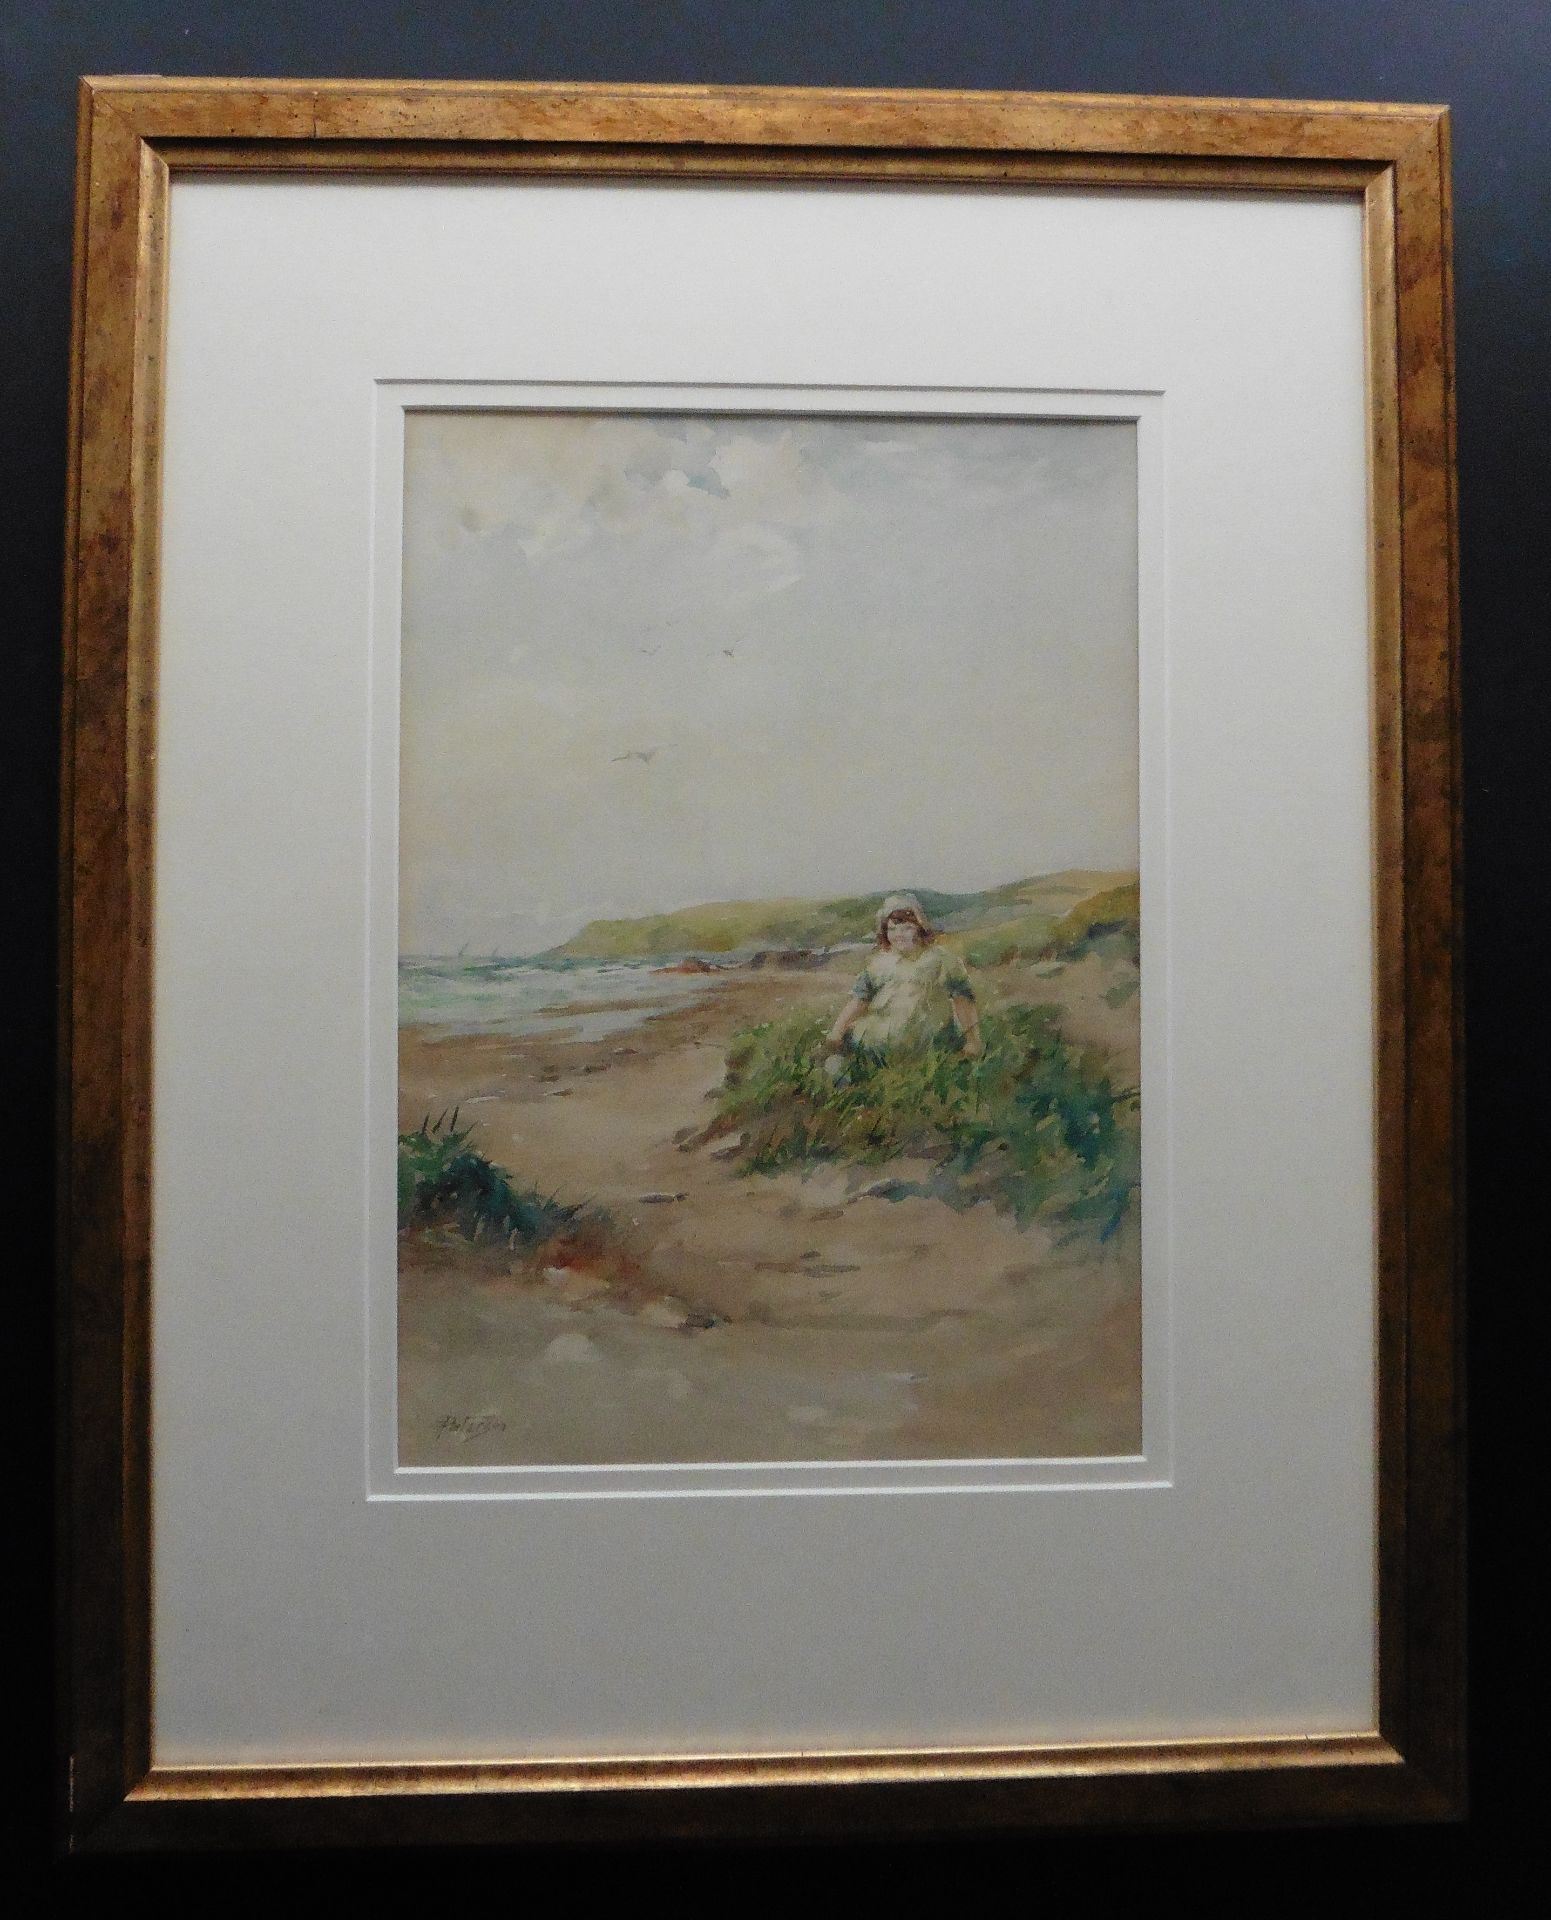 Original watercolour by Scottish artist Tom Patterson "Child on the beach" - Image 2 of 4